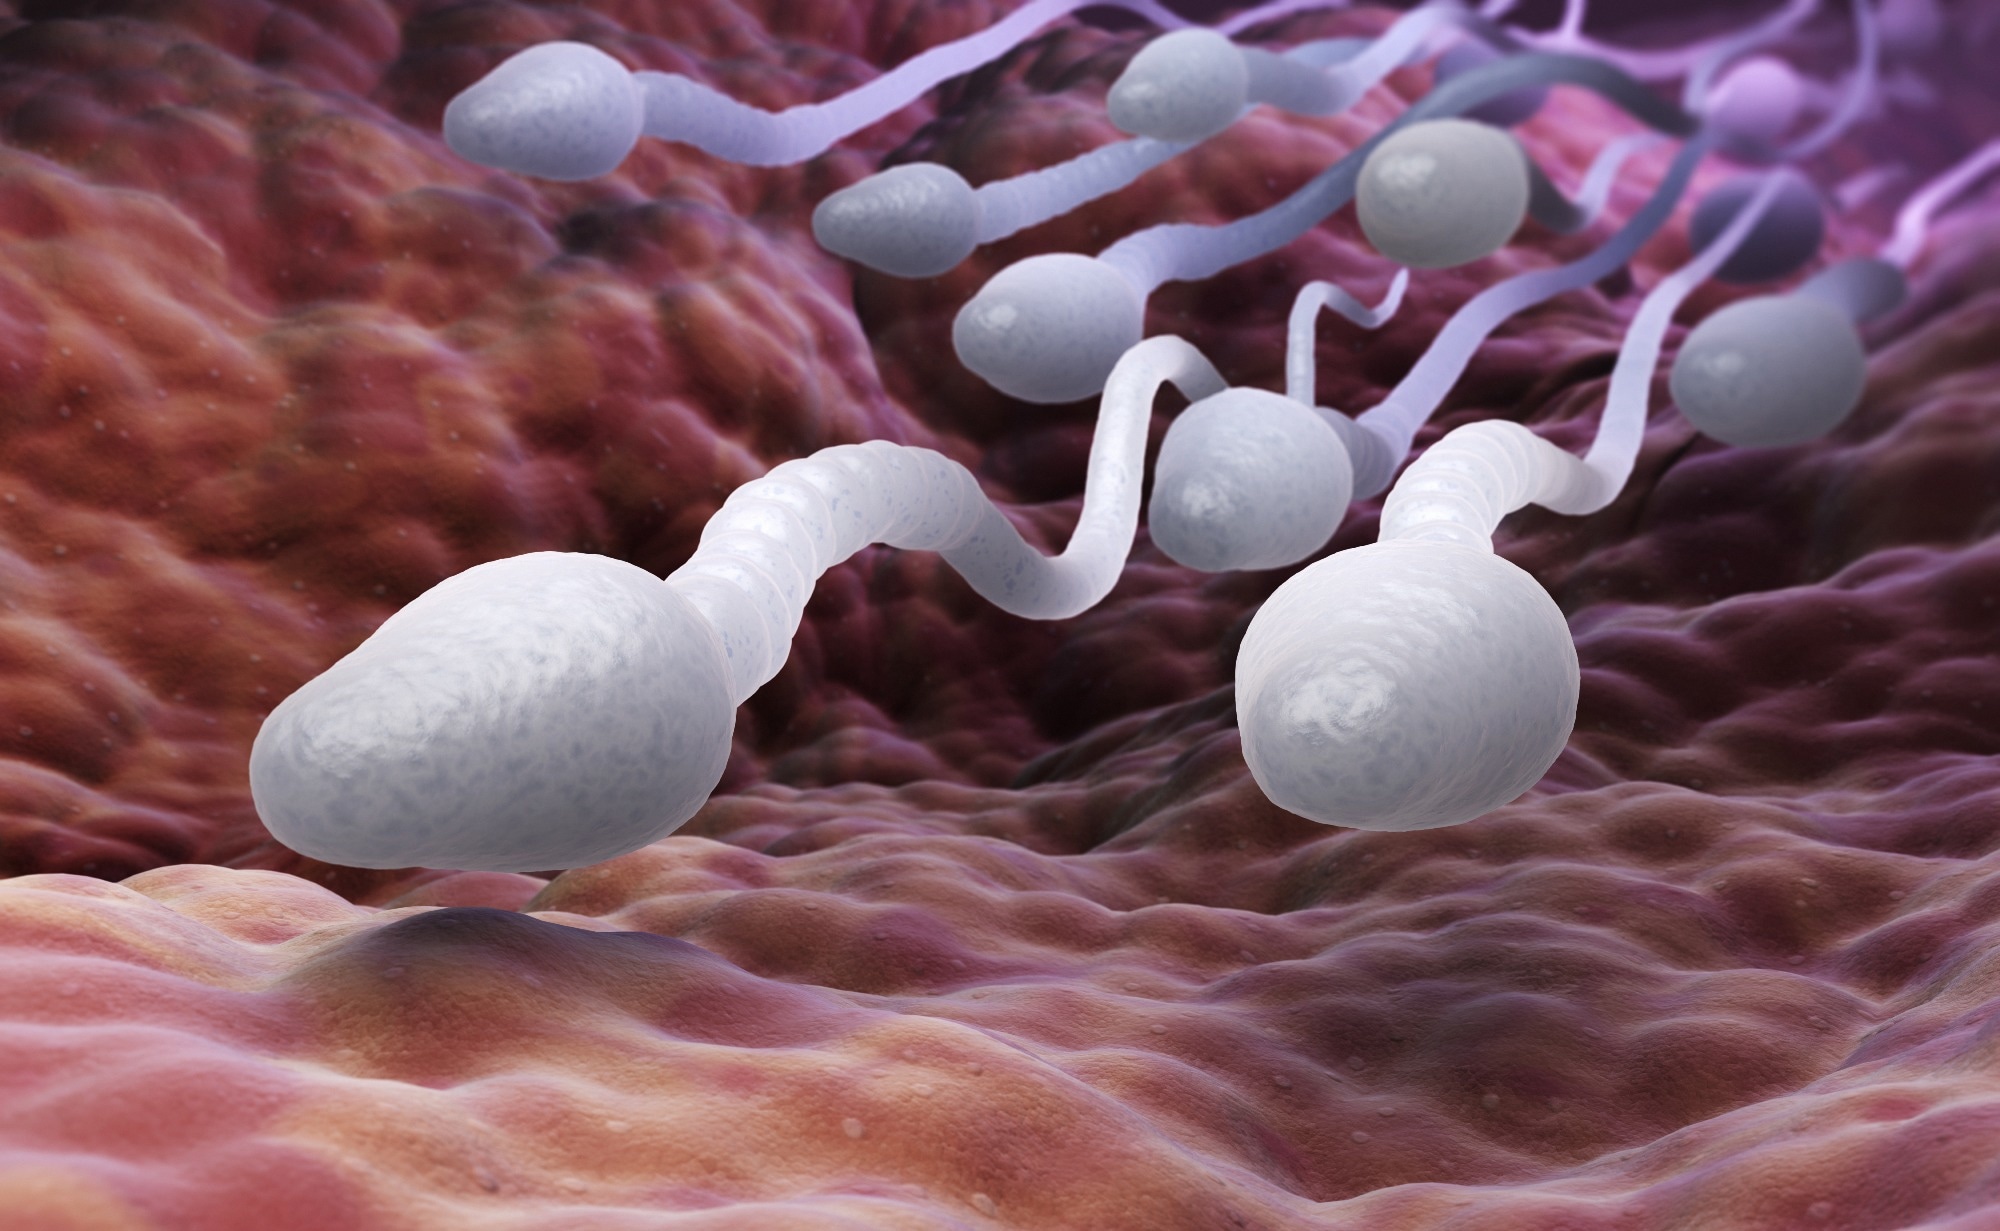 Study: The effect of COVID-19 vaccines on sperm parameters: a systematic review and meta-analysis. Image Credit: Tatiana Shepeleva/Shutterstock